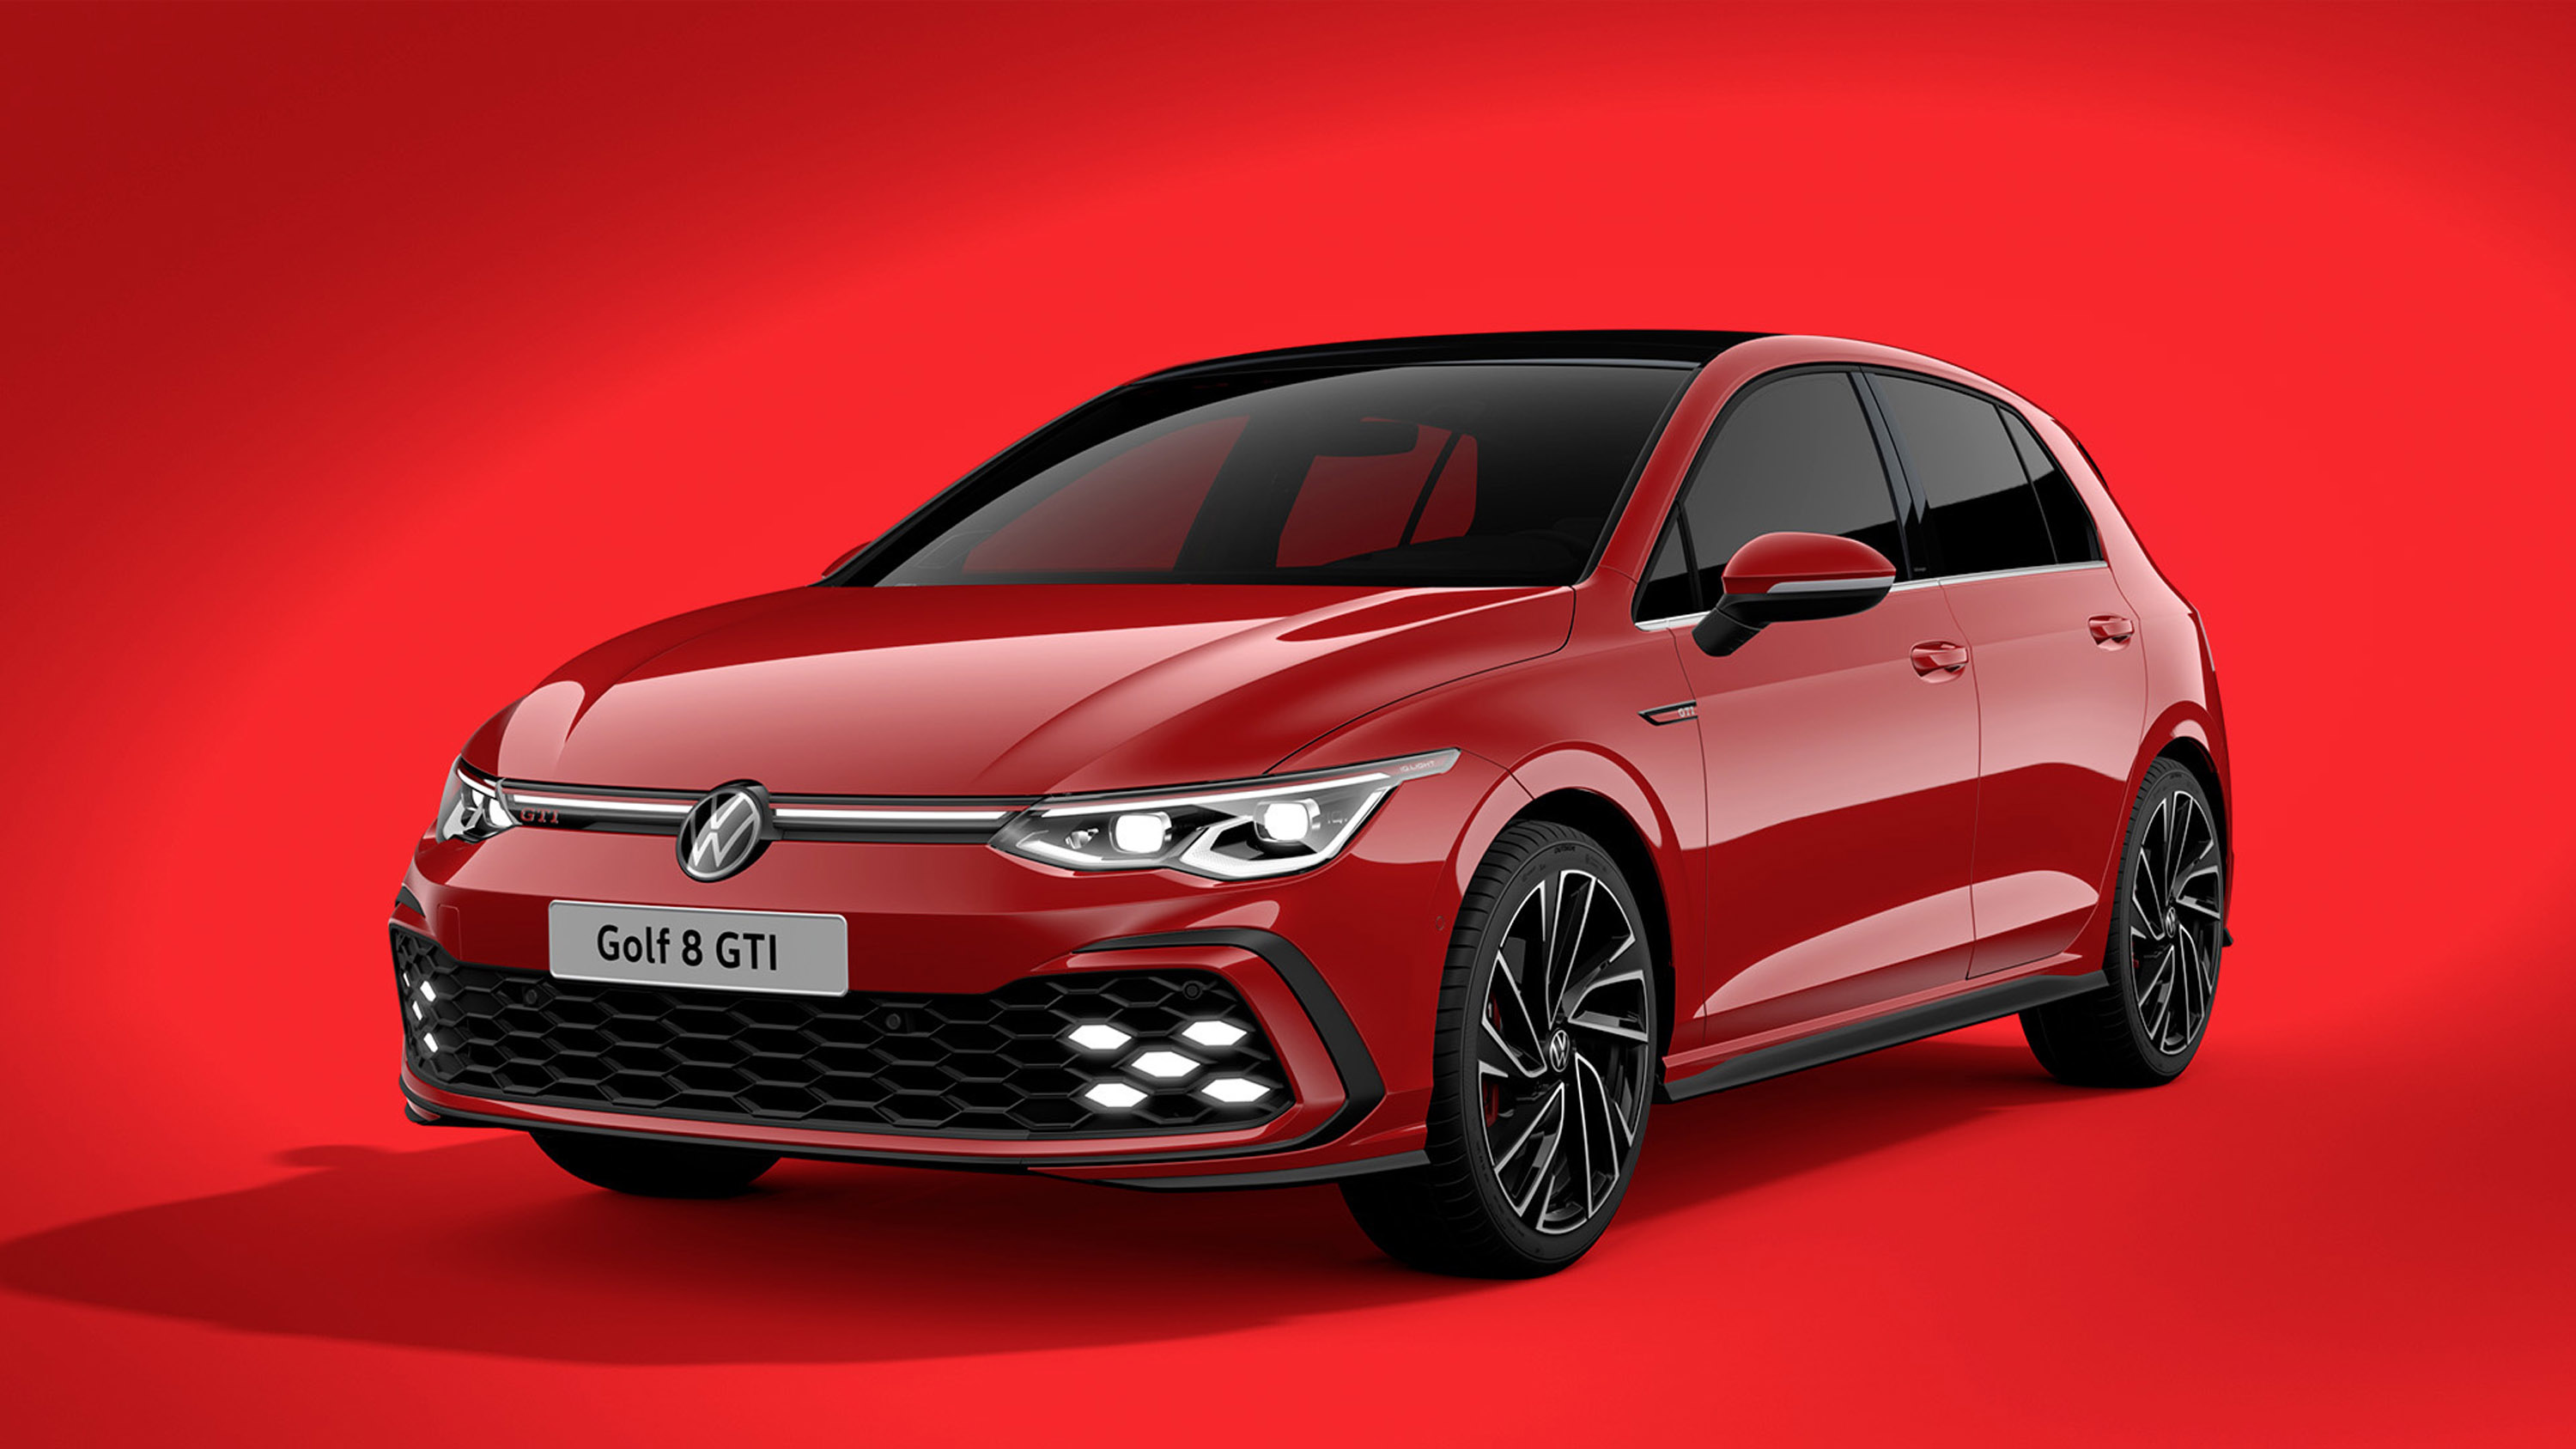 2020 Volkswagen Golf 8 GTI comes with enhanced drivetrain system and